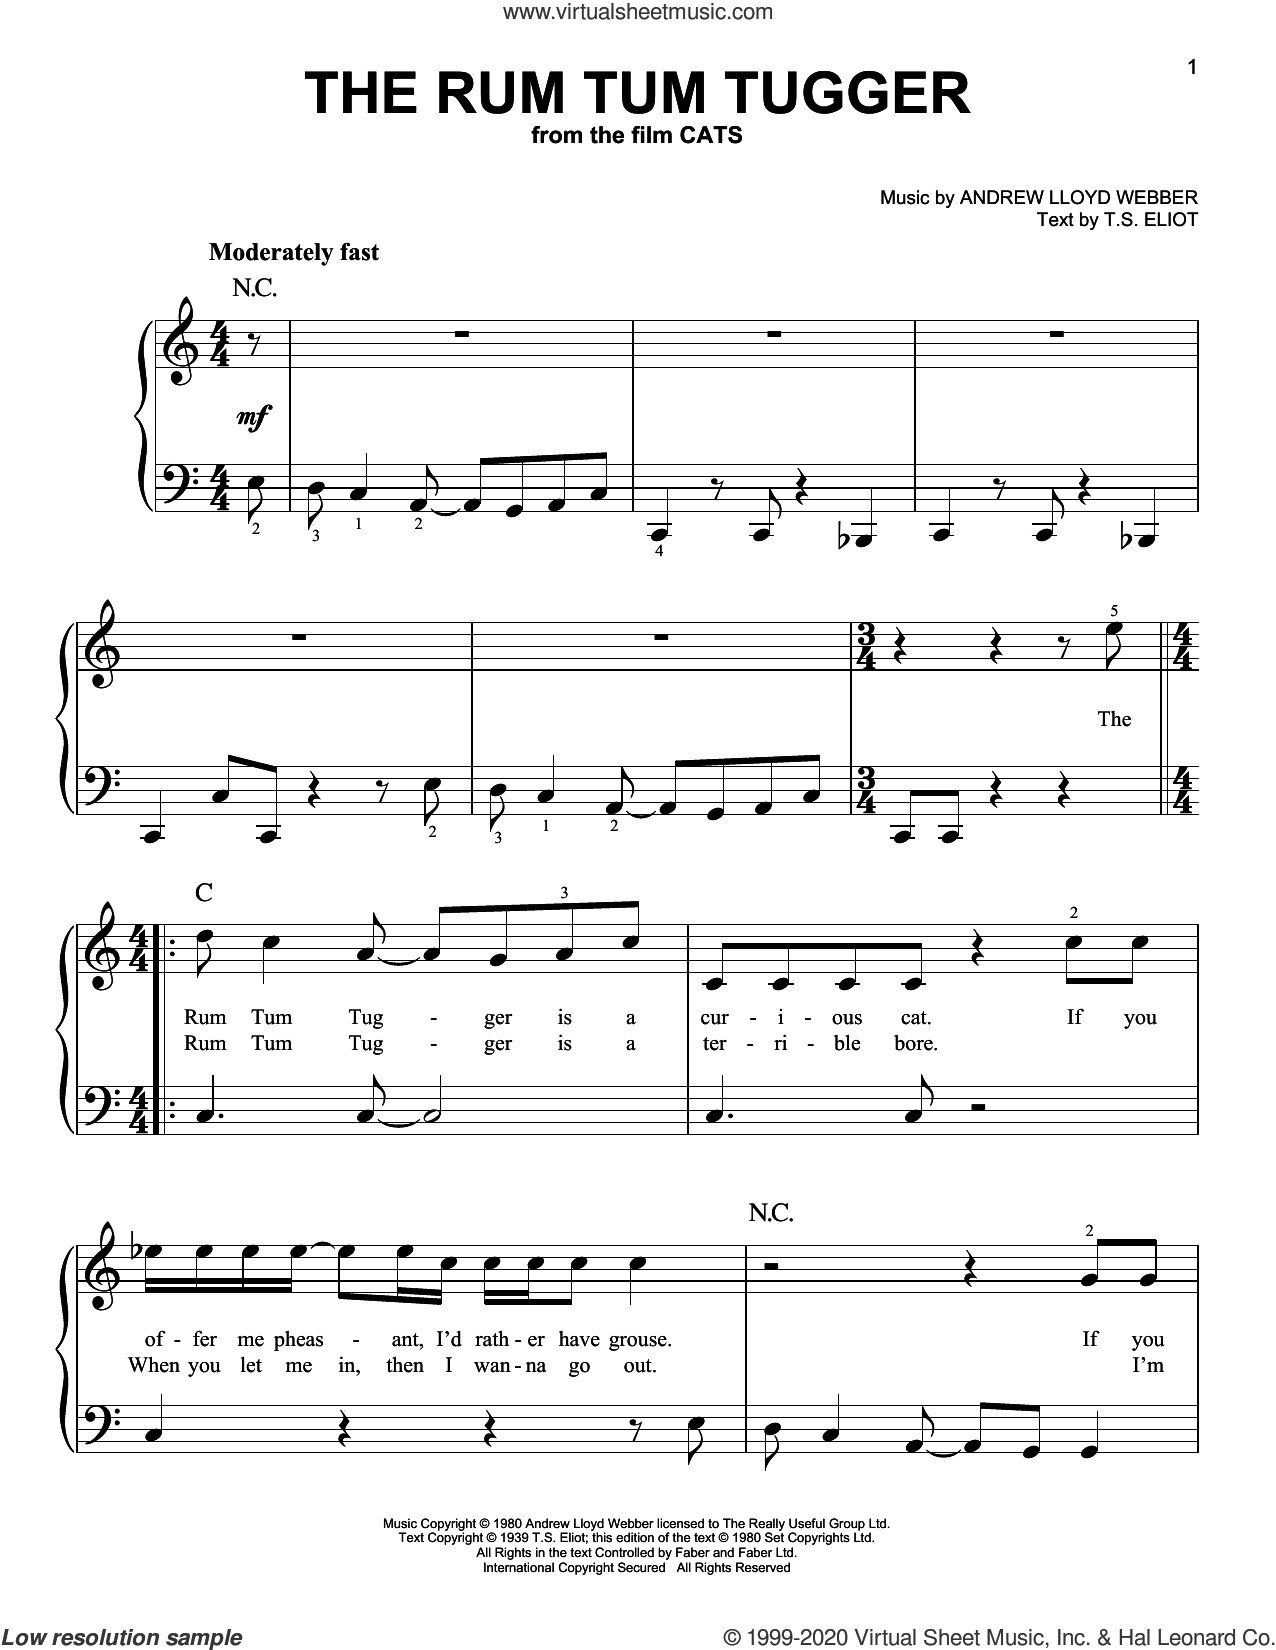 The Rum Tum Tugger (from the Motion Picture Cats) sheet music for piano ...